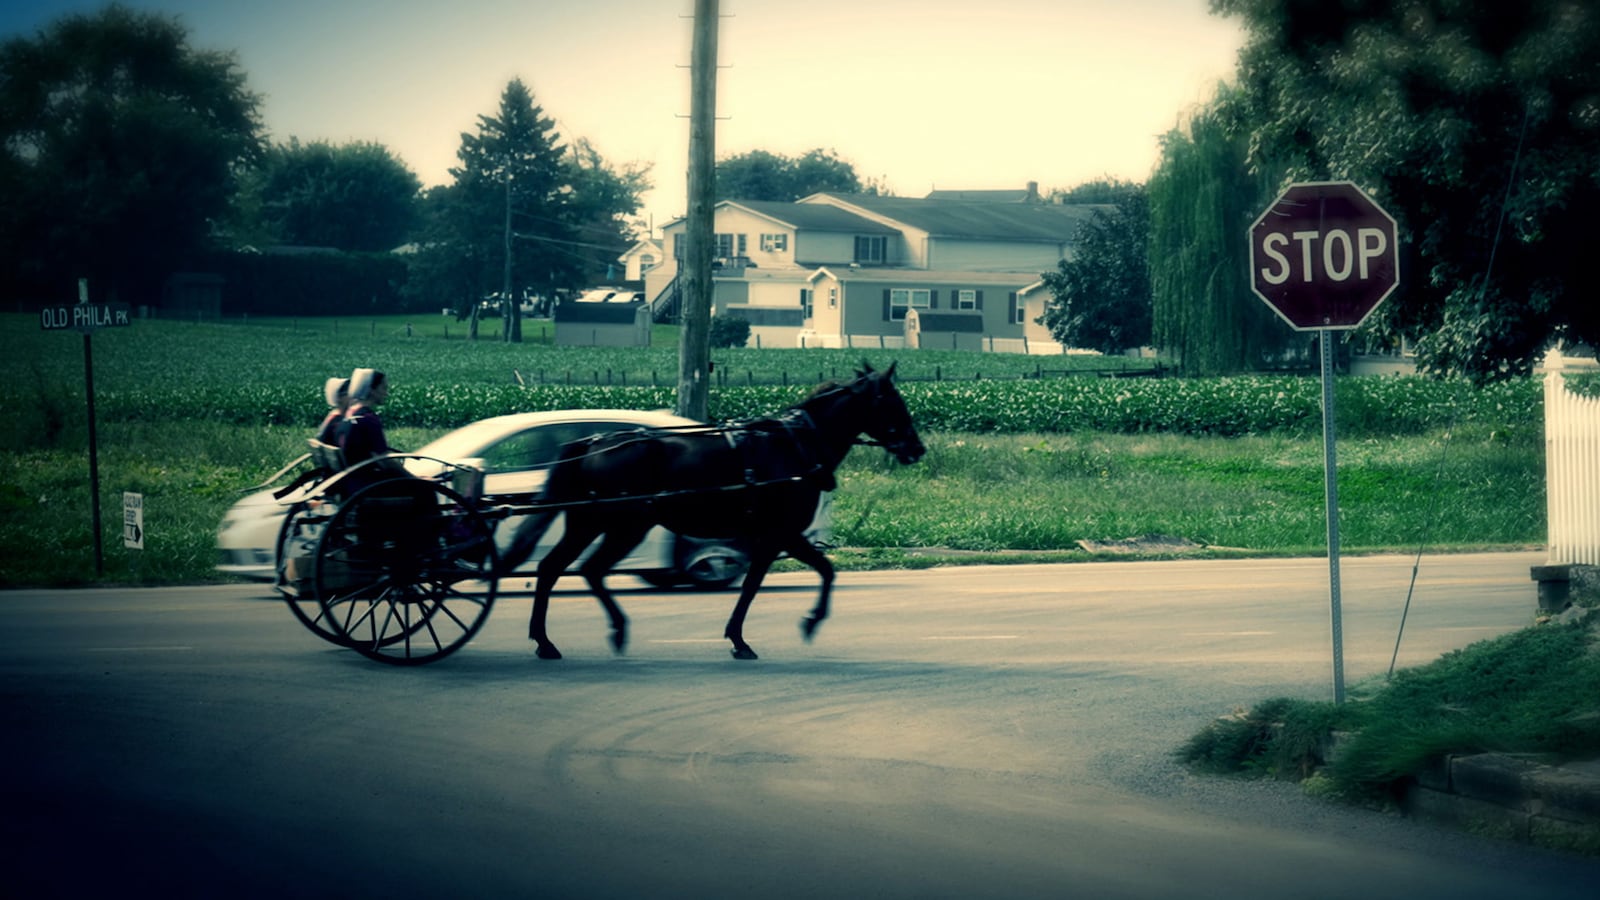 sins-of-the-amish